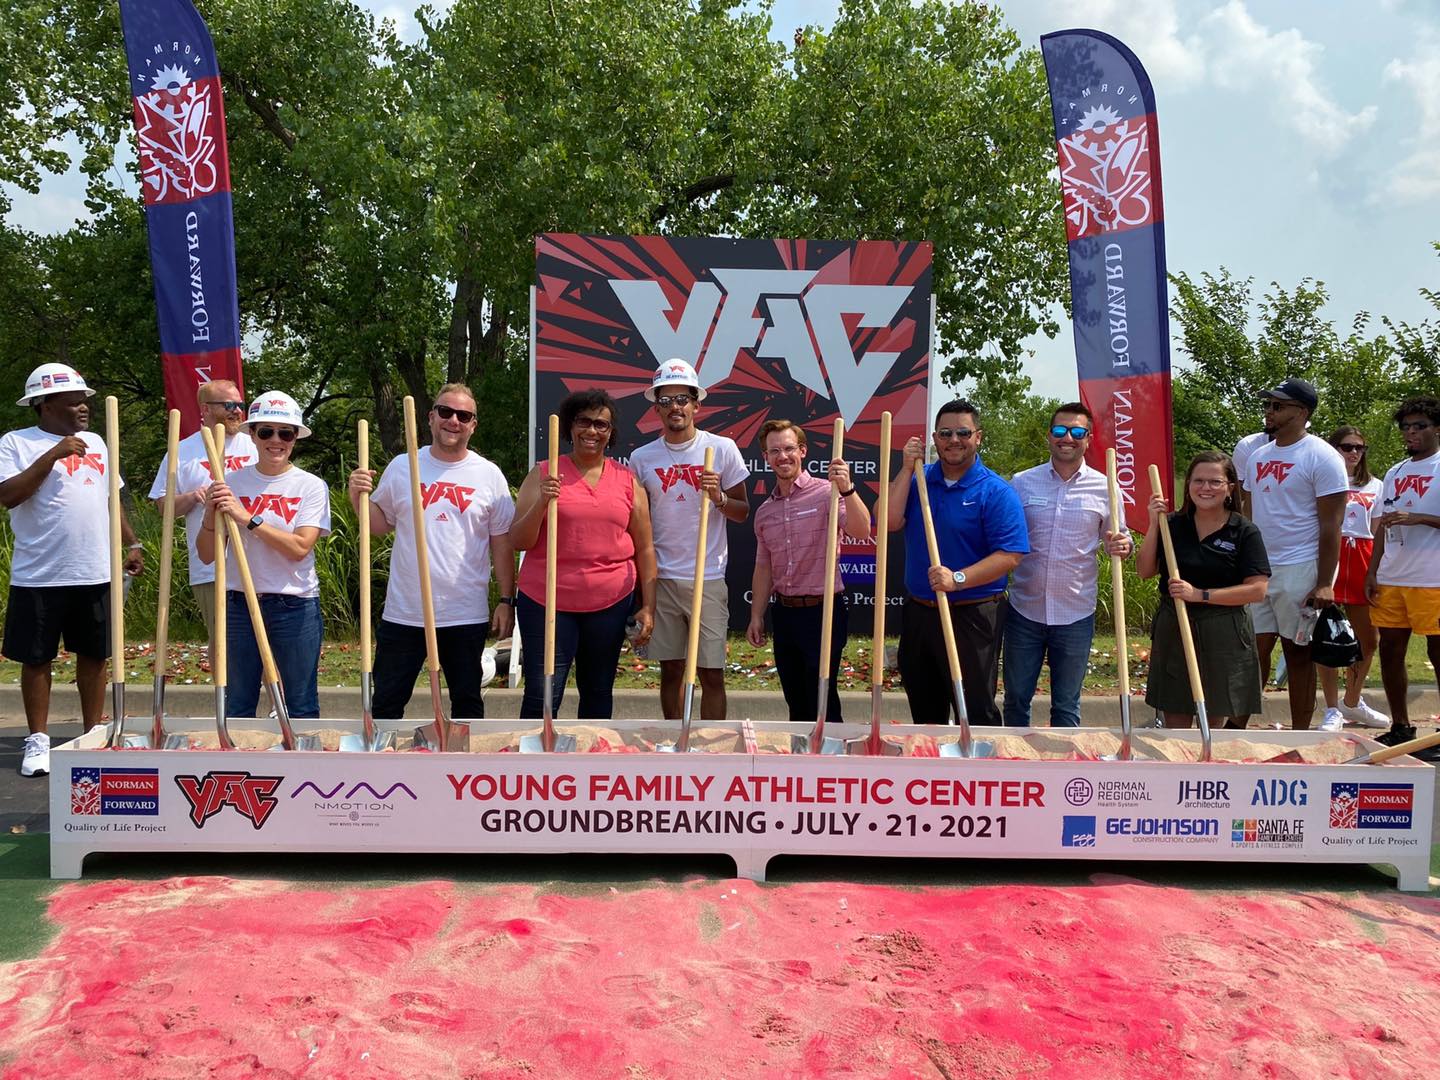 Young Family Athletic Center Groundbreaking ceremony - July 21, 2021